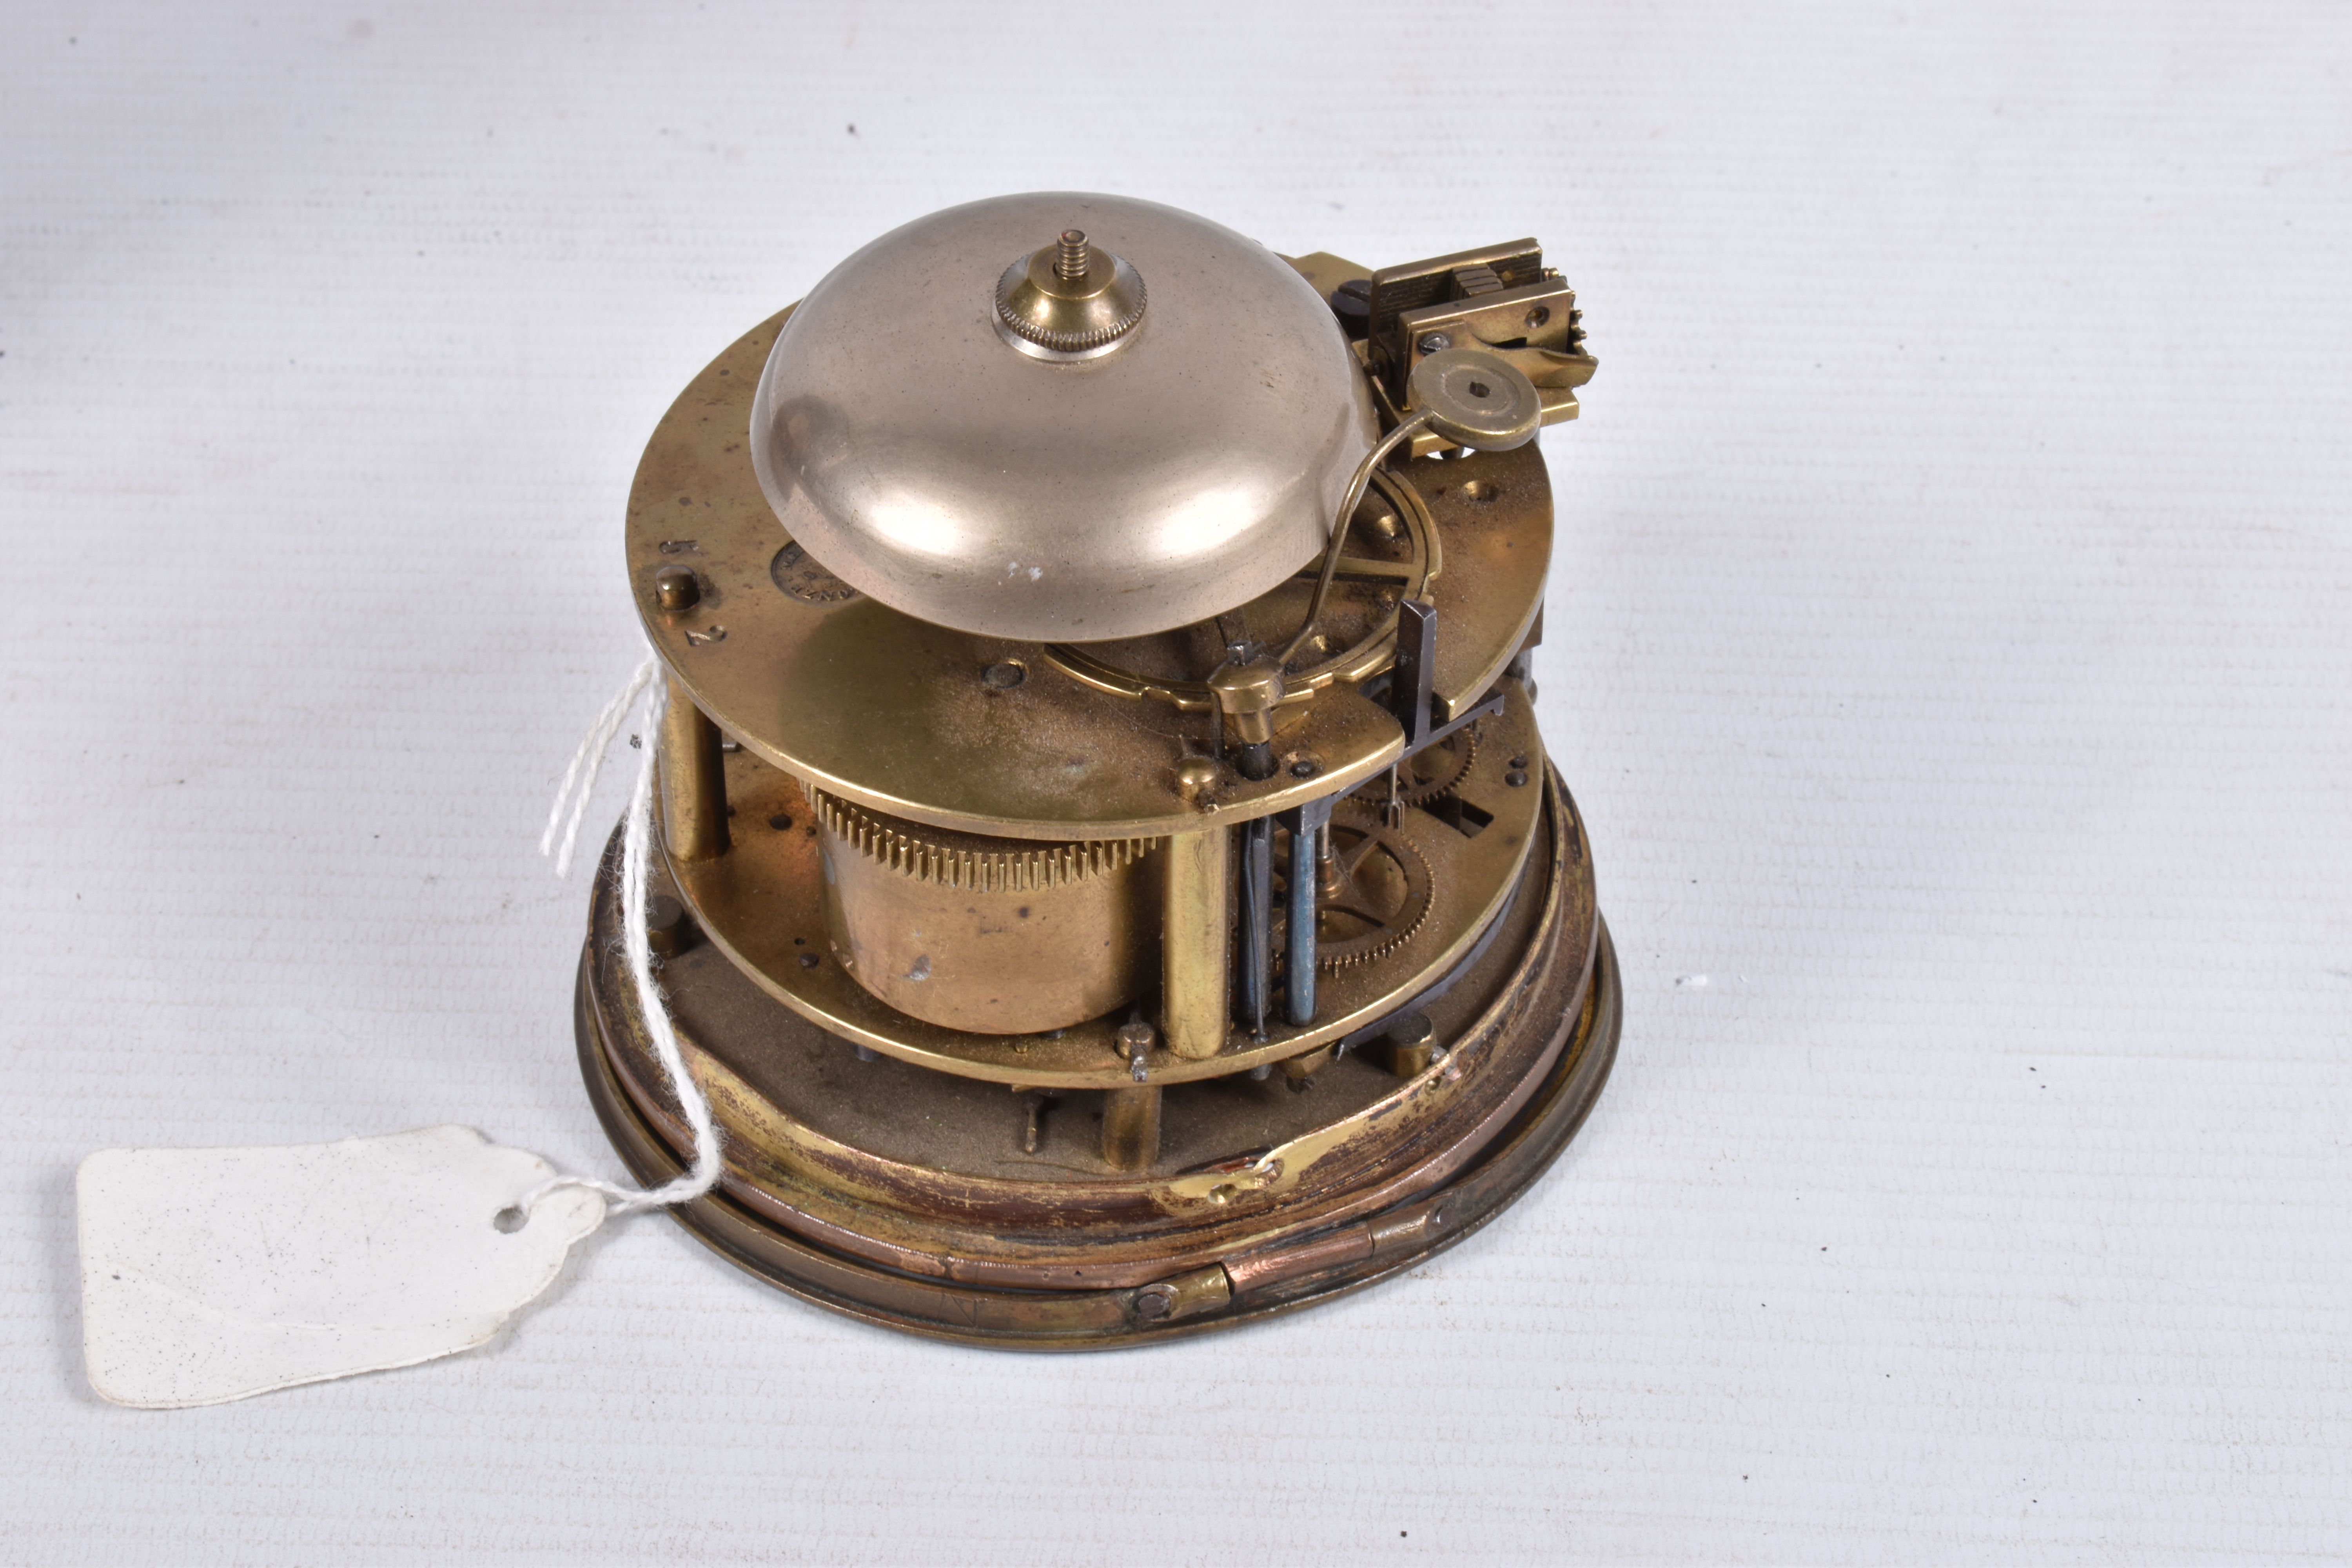 A TRENCH ART MANTLE CLOCK FORMED FROM A BOMB CASING, 19th century movement free from the case, - Image 4 of 11